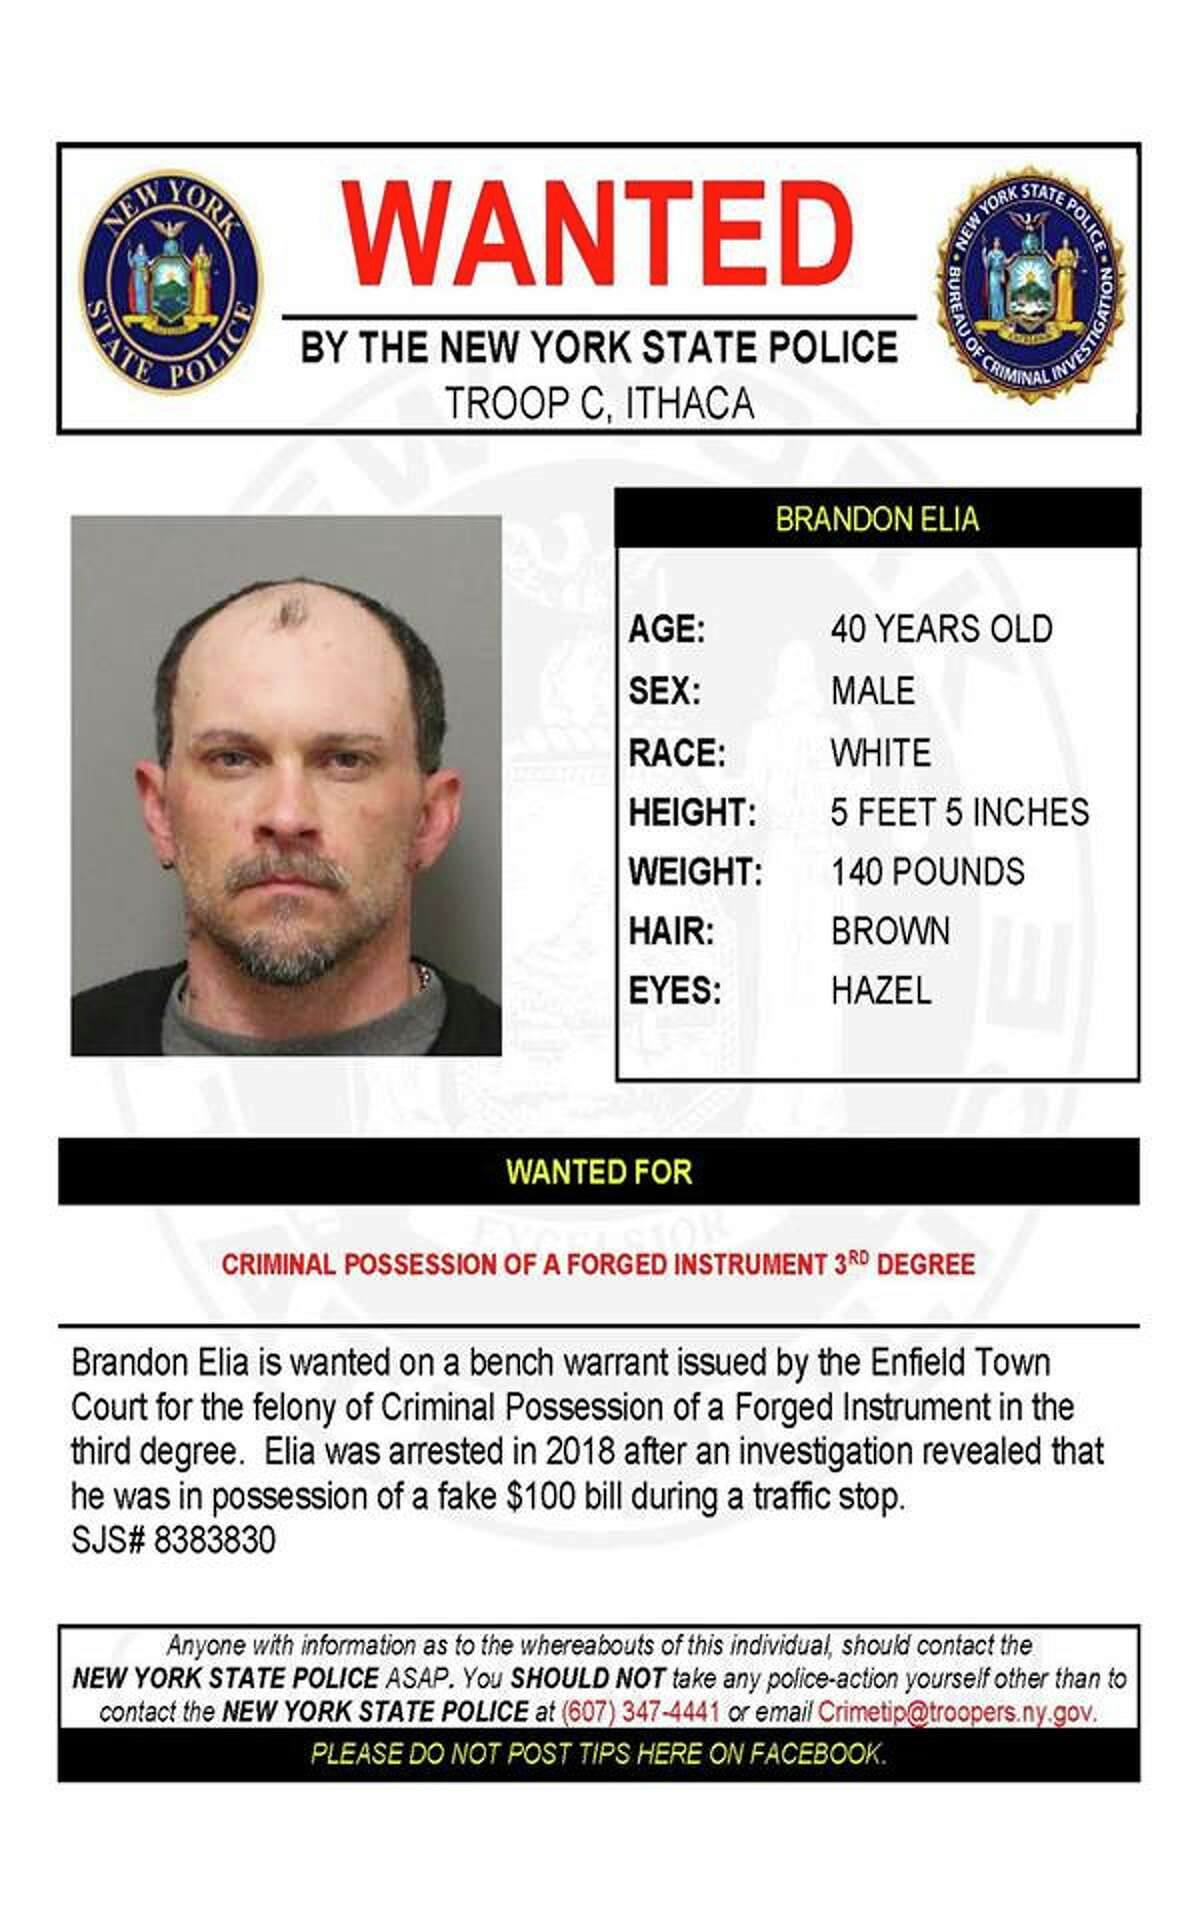 Brandon Elia, 40, is wanted on a bench warrant issued by the Enfield Town Court in Tompkins County for the felony of criminal possession of a forged instrument. Elia was arrested in 2018 after an investigation showed he had a fake $100 bill during a traffic stop, troopers said.